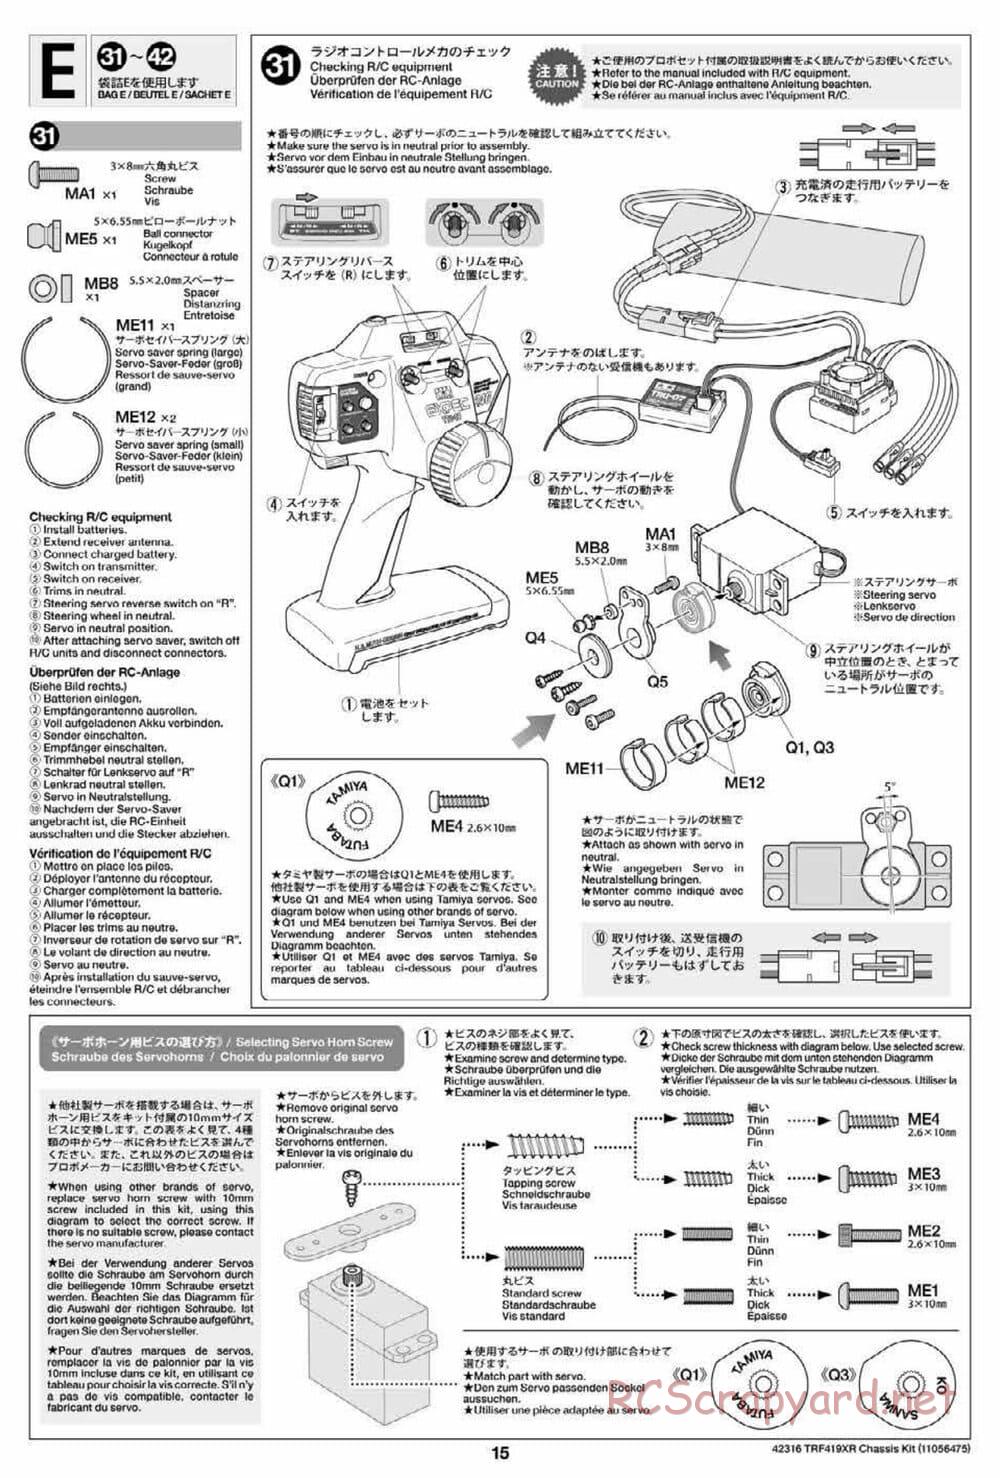 Tamiya - TRF419XR Chassis - Manual - Page 15